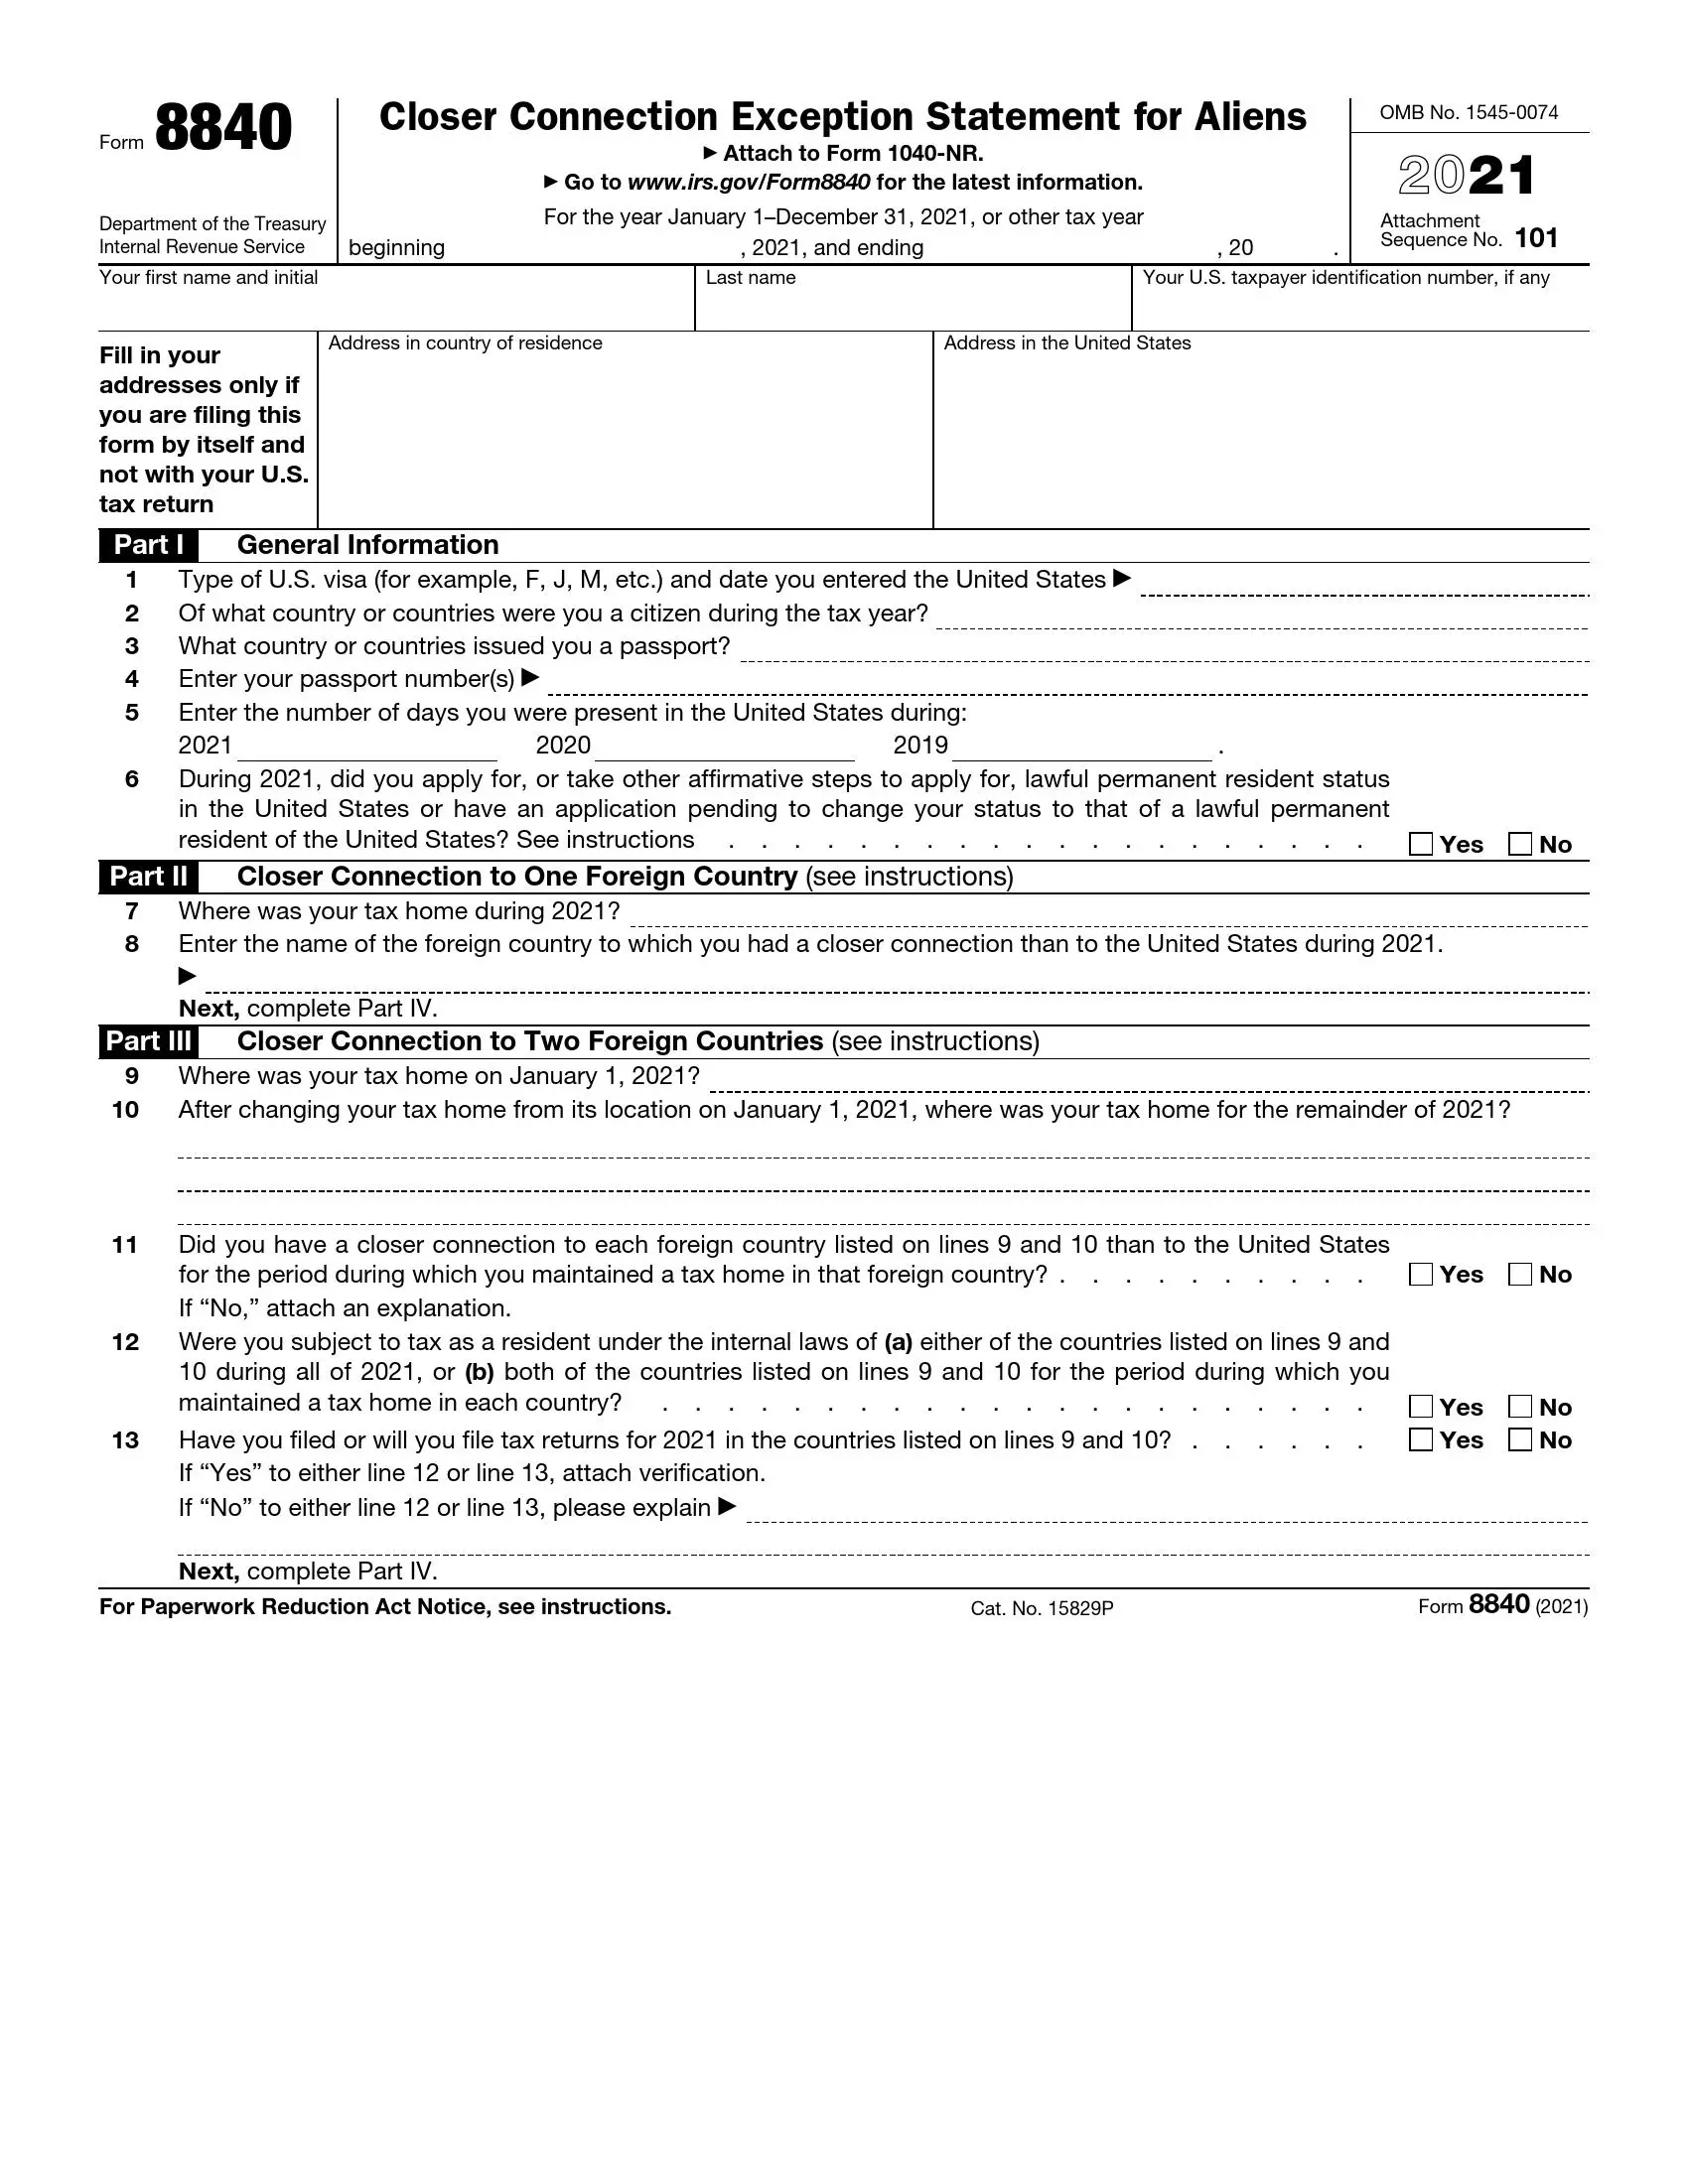 irs form 8840 2021 preview